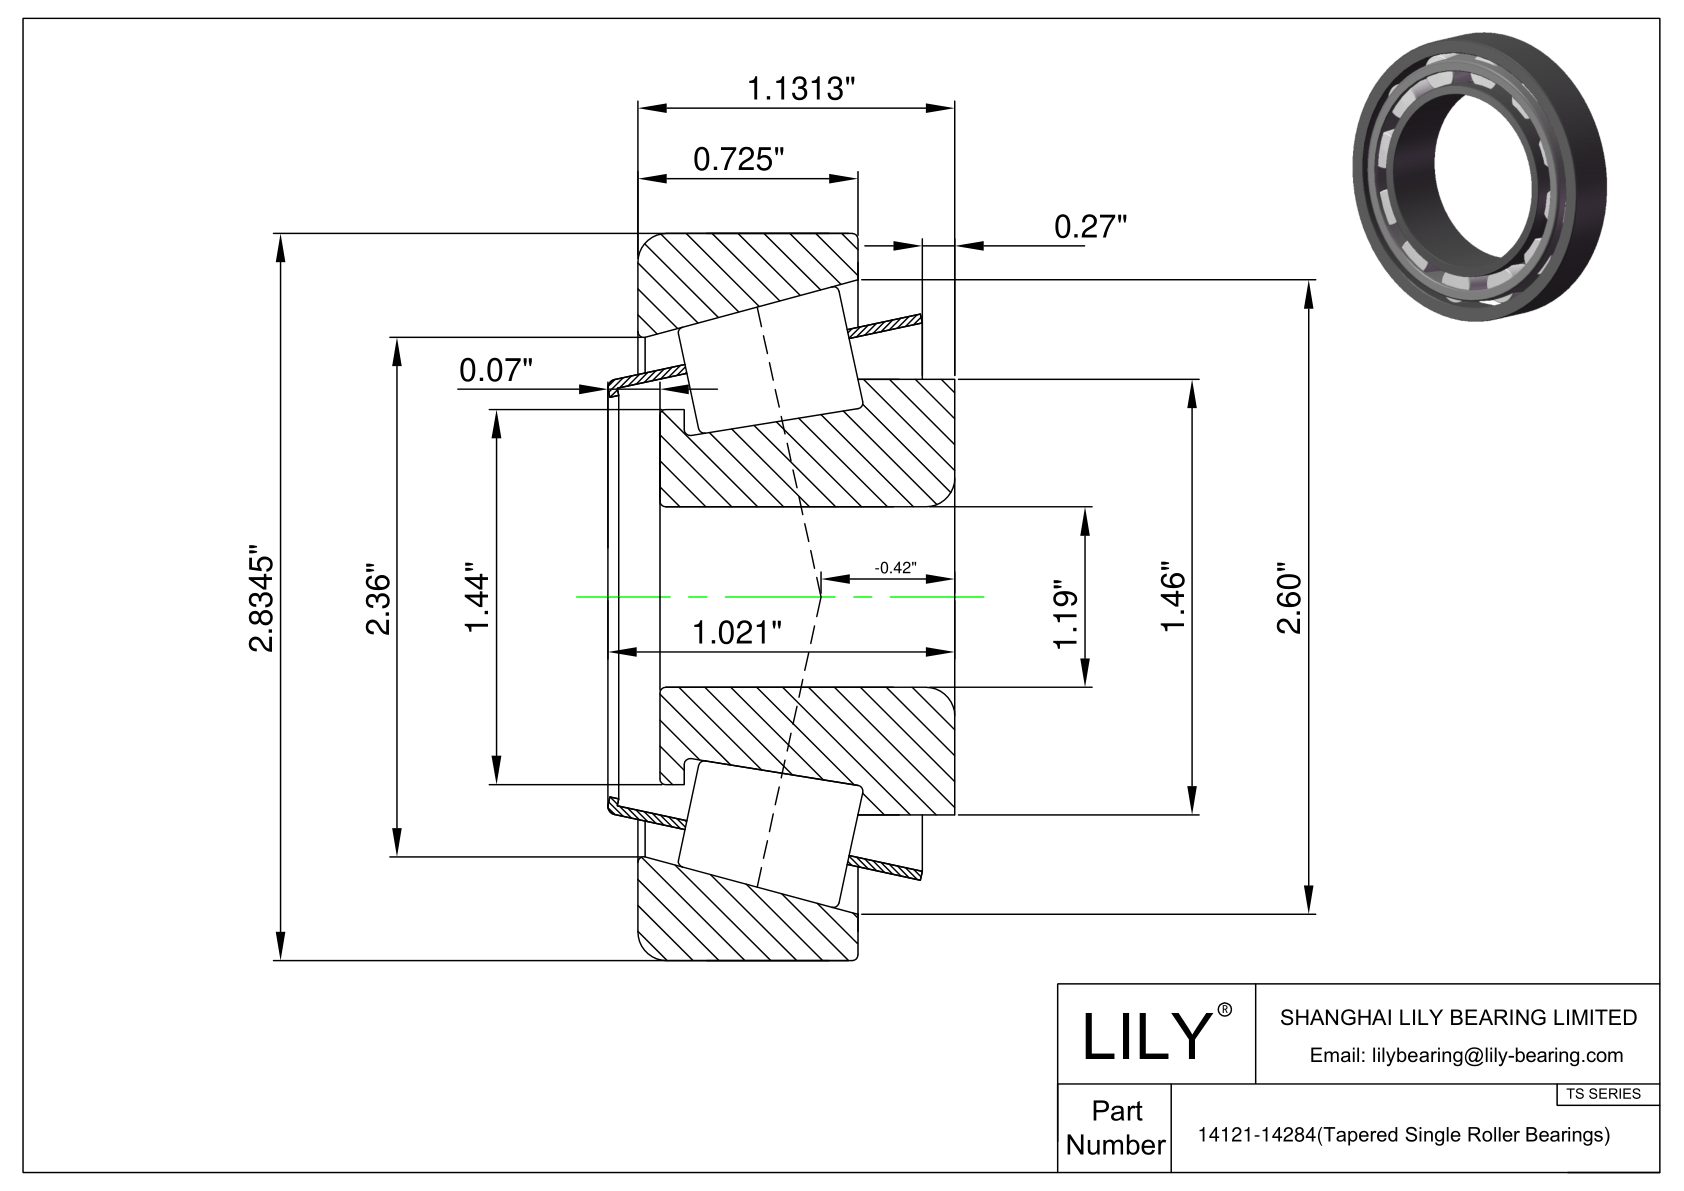 14121-14284 TS (Tapered Single Roller Bearings) (Imperial) cad drawing